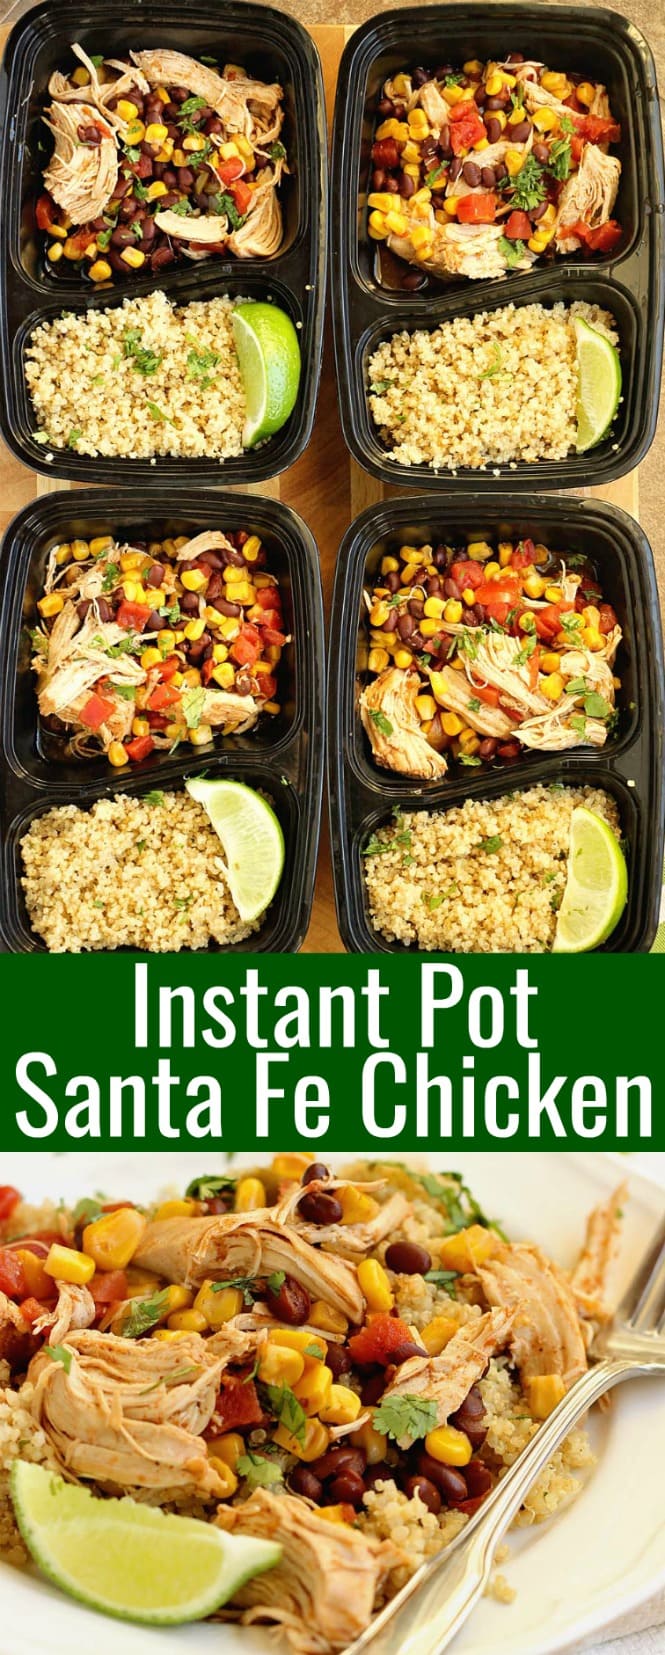 Instant Pot Santa Fe Chicken over Quinoa - An easy healthy instant pot chicken recipe perfect for dinner or make-ahead lunches for your week!